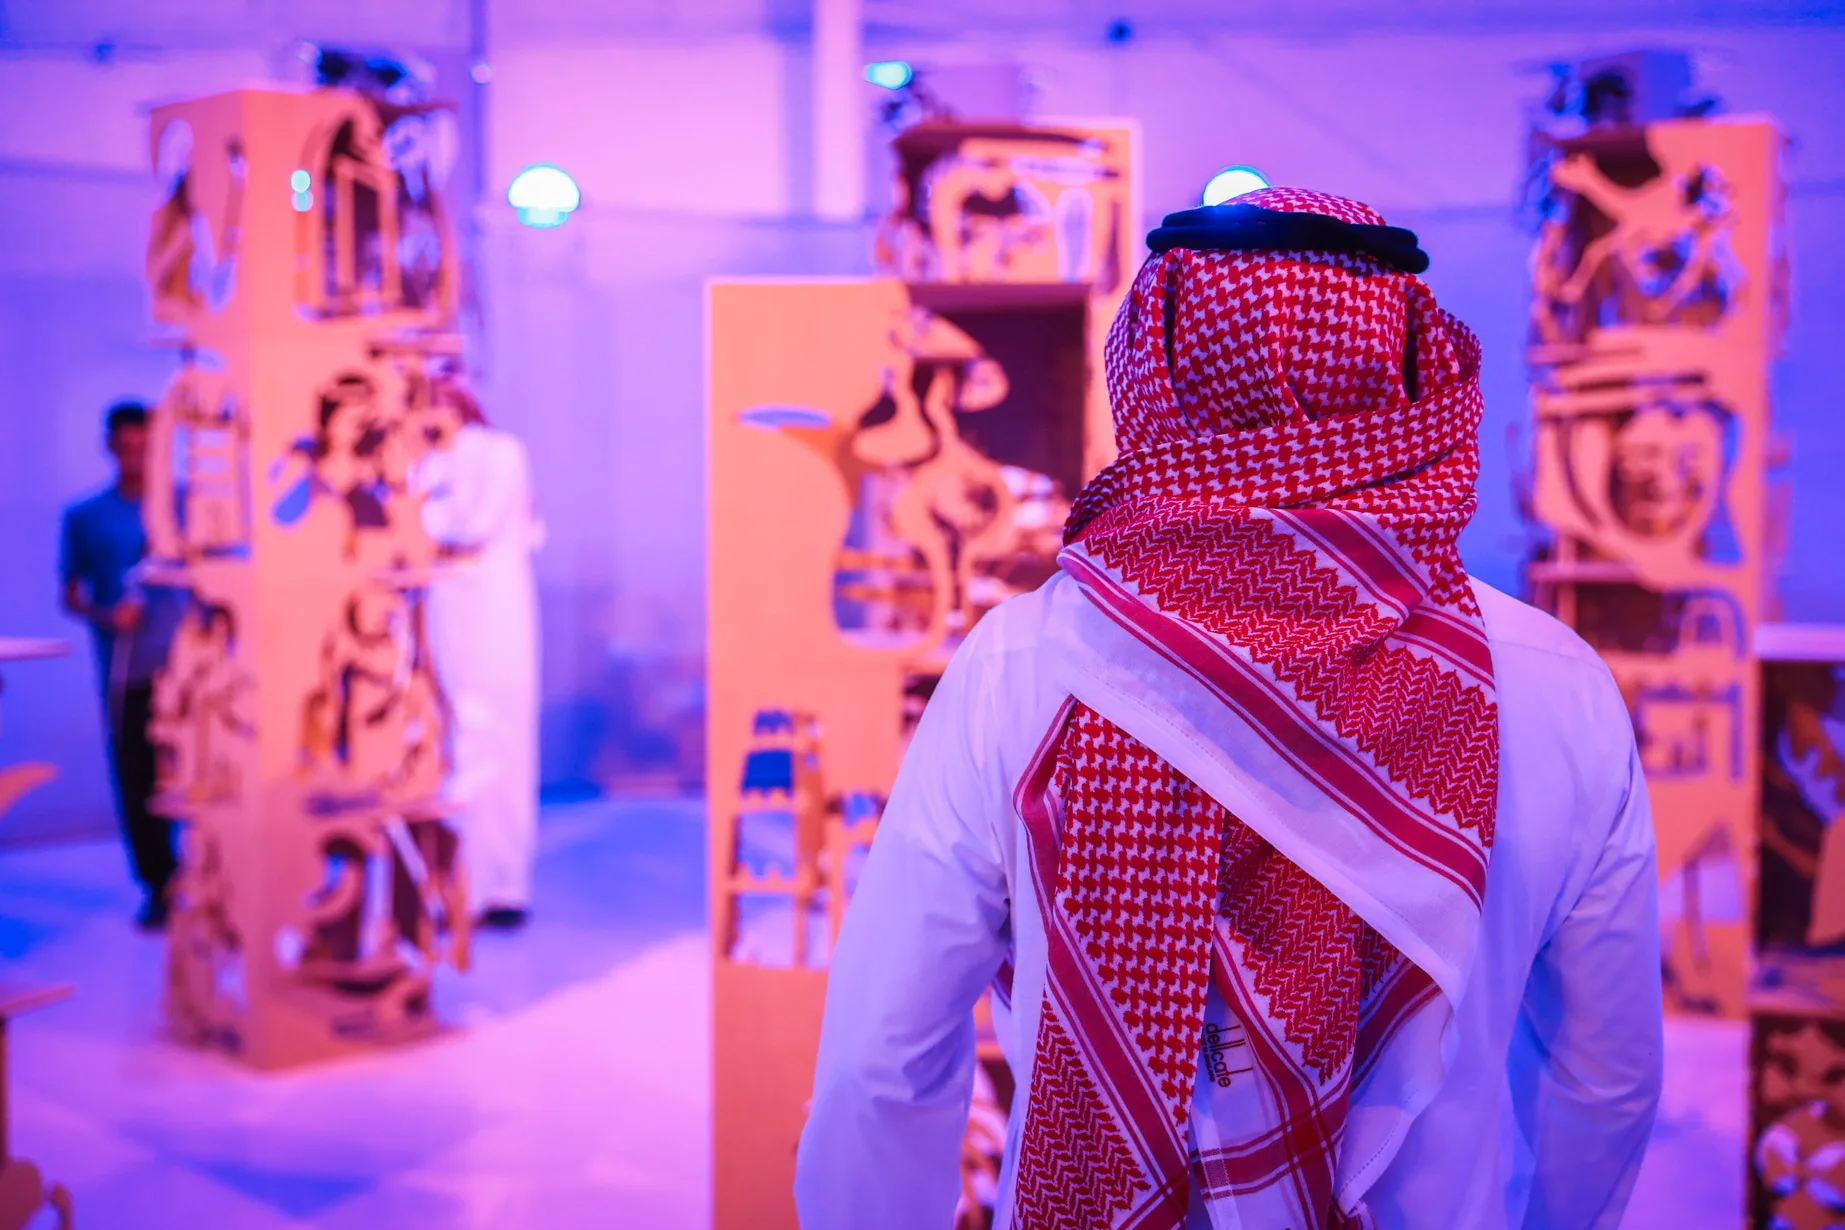 View of the installation Interconnected made of cutout cubes stacked in space during the Jax Art Festival in Riyadh, Saudi Arabia, 2022